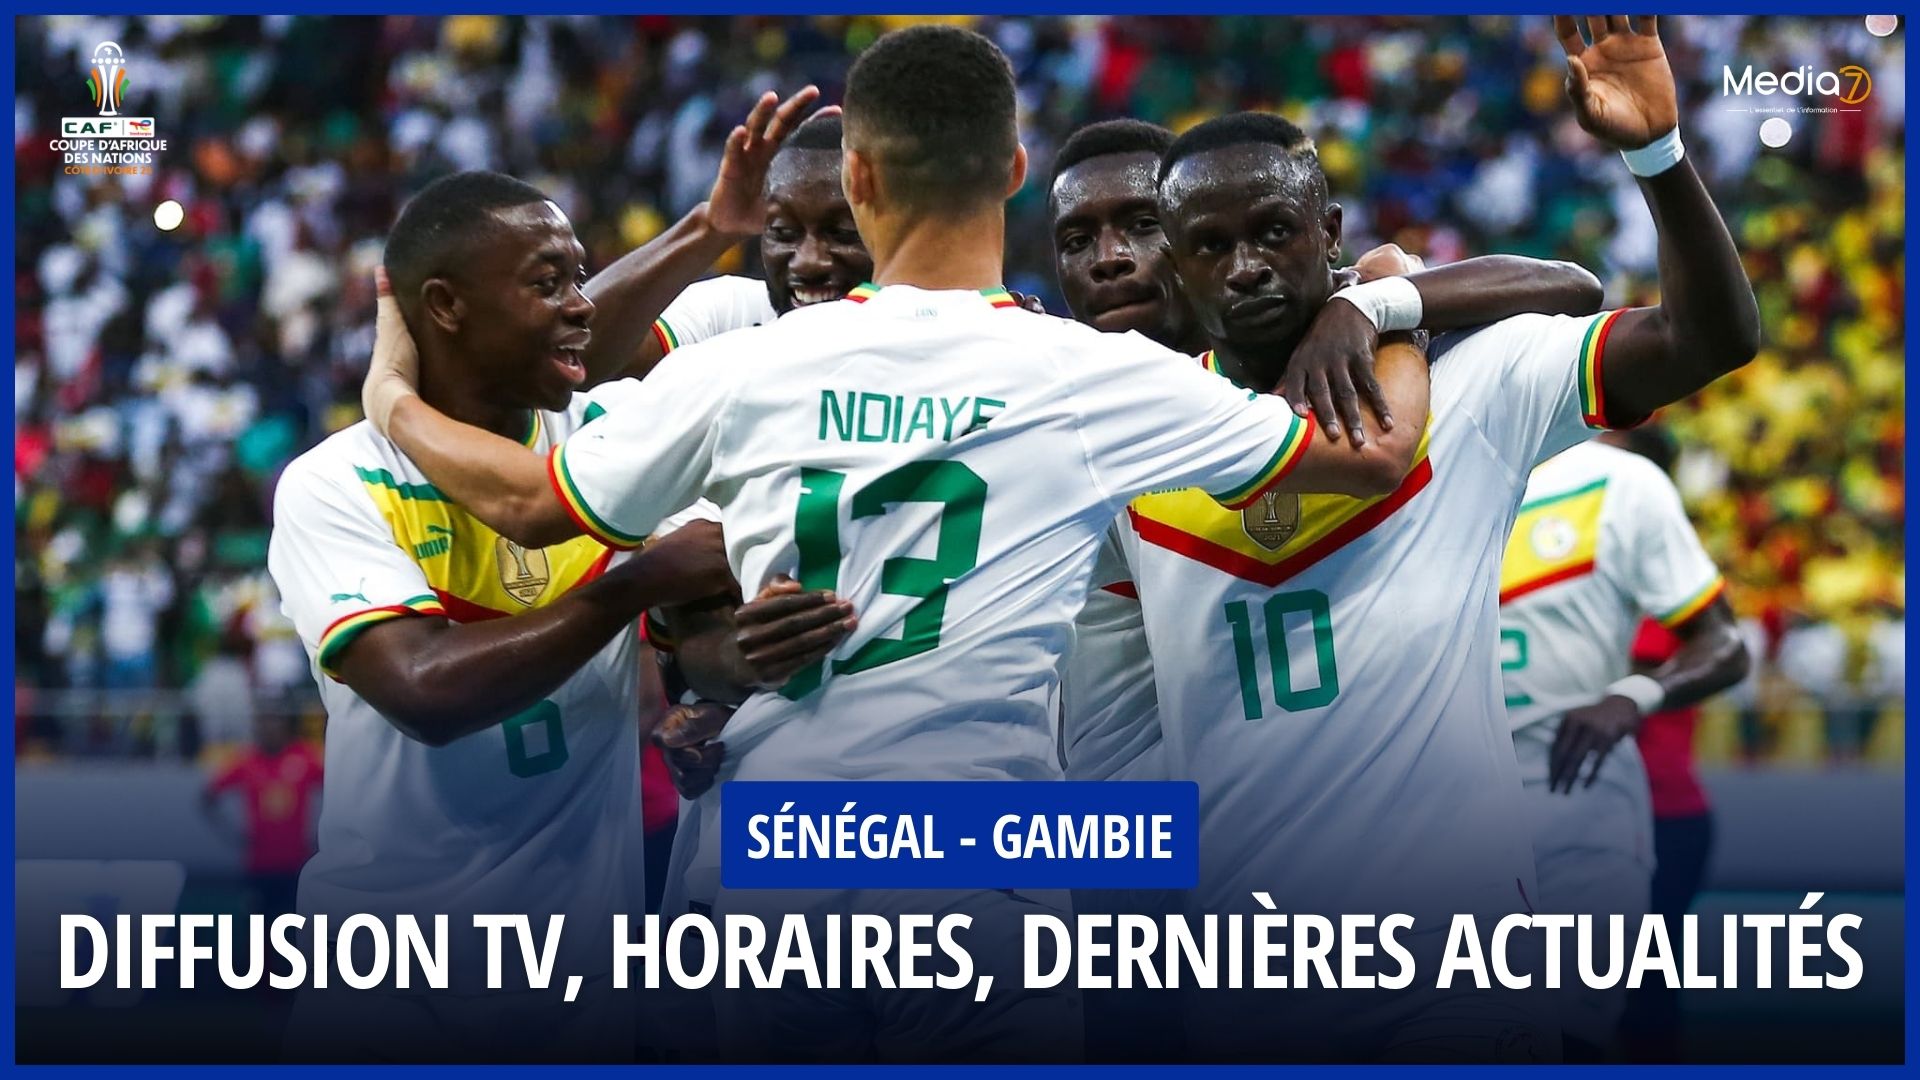 Senegal - Gambia live: TV broadcast, schedules, latest news - Media7